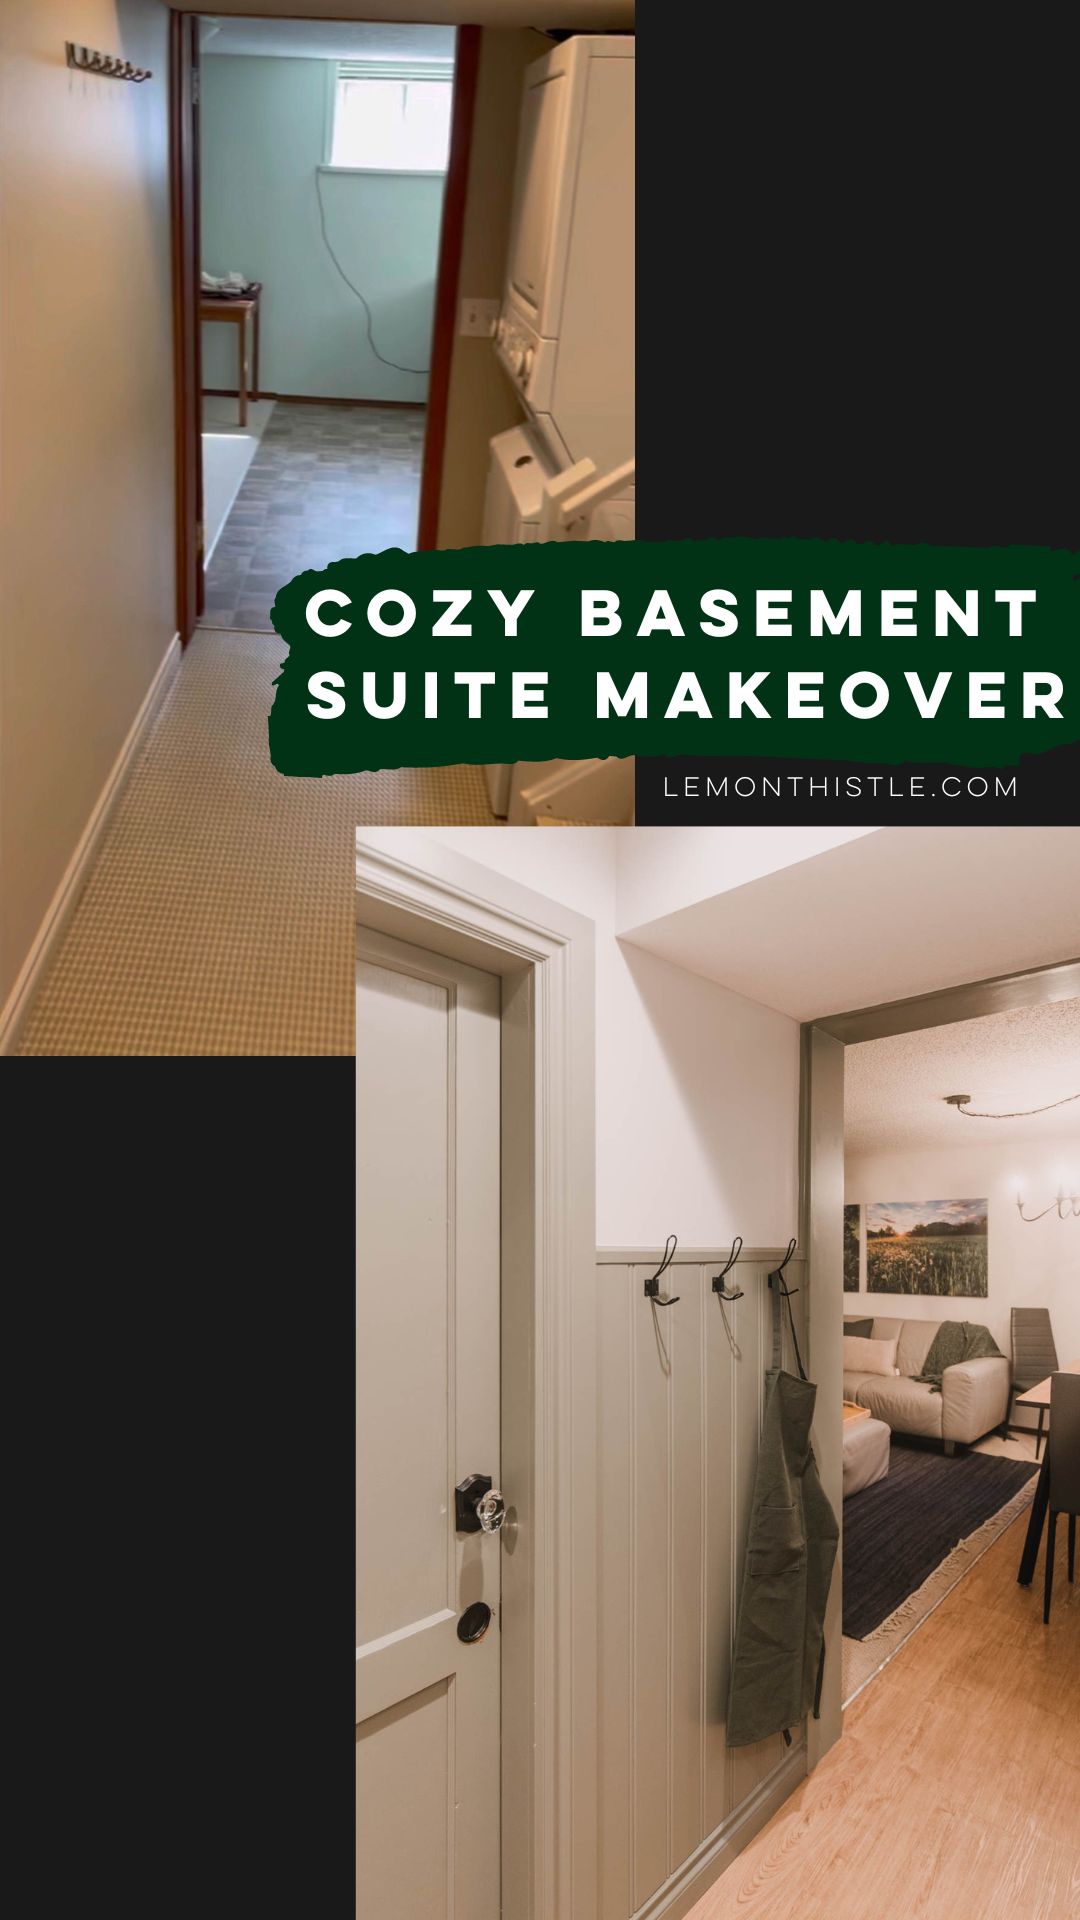 Cozy Basement Suite Makeover before and after with text over